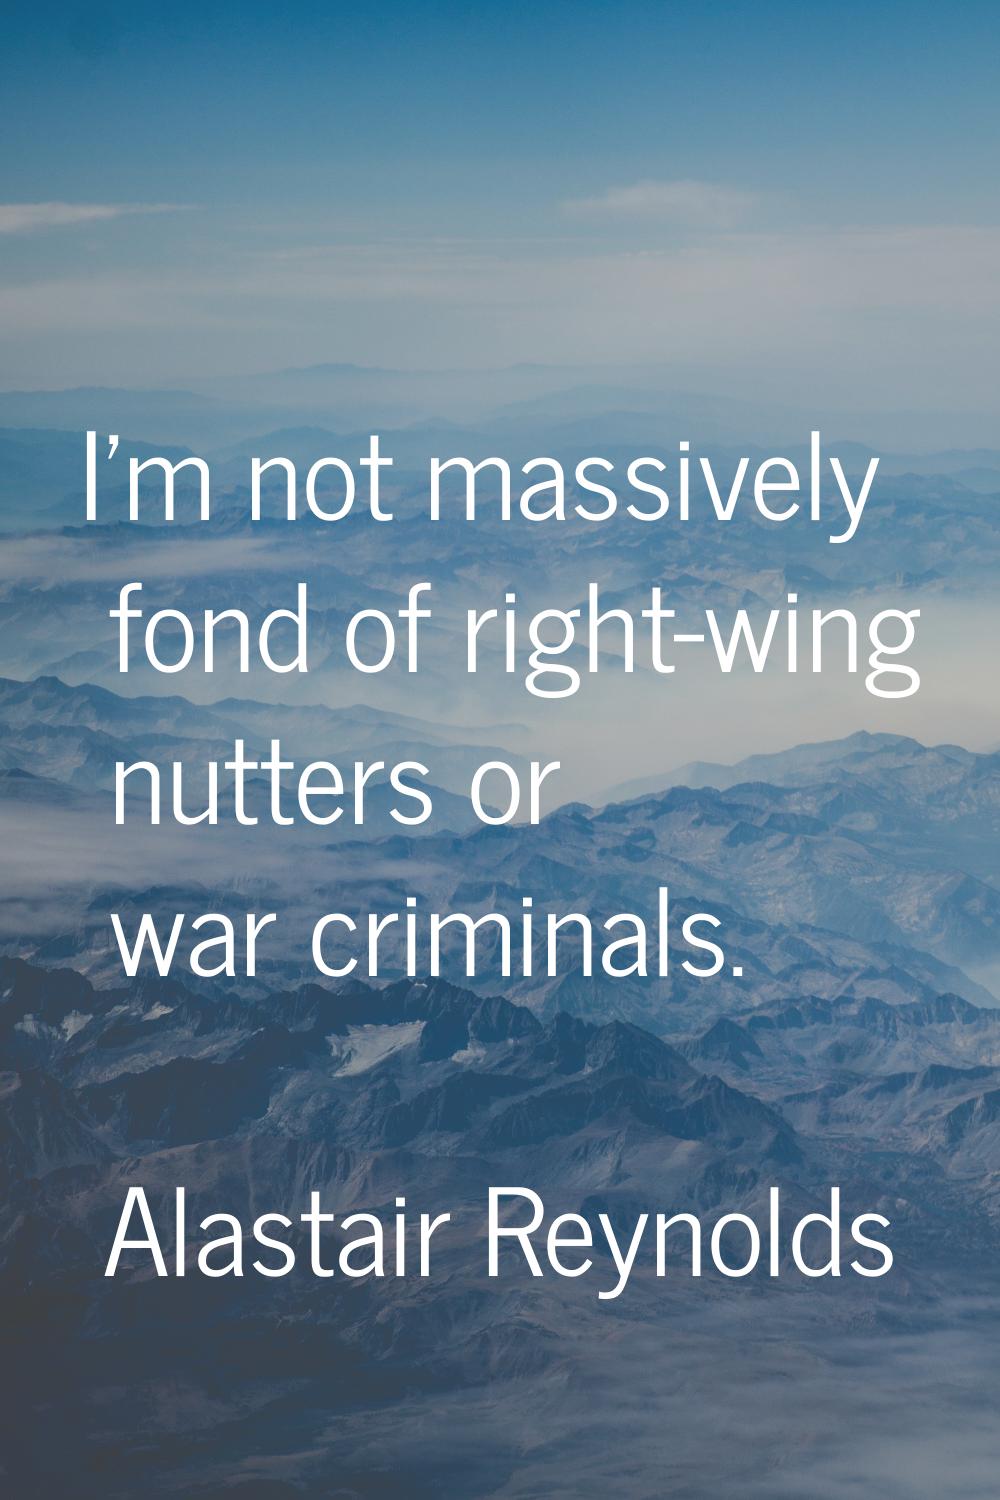 I'm not massively fond of right-wing nutters or war criminals.